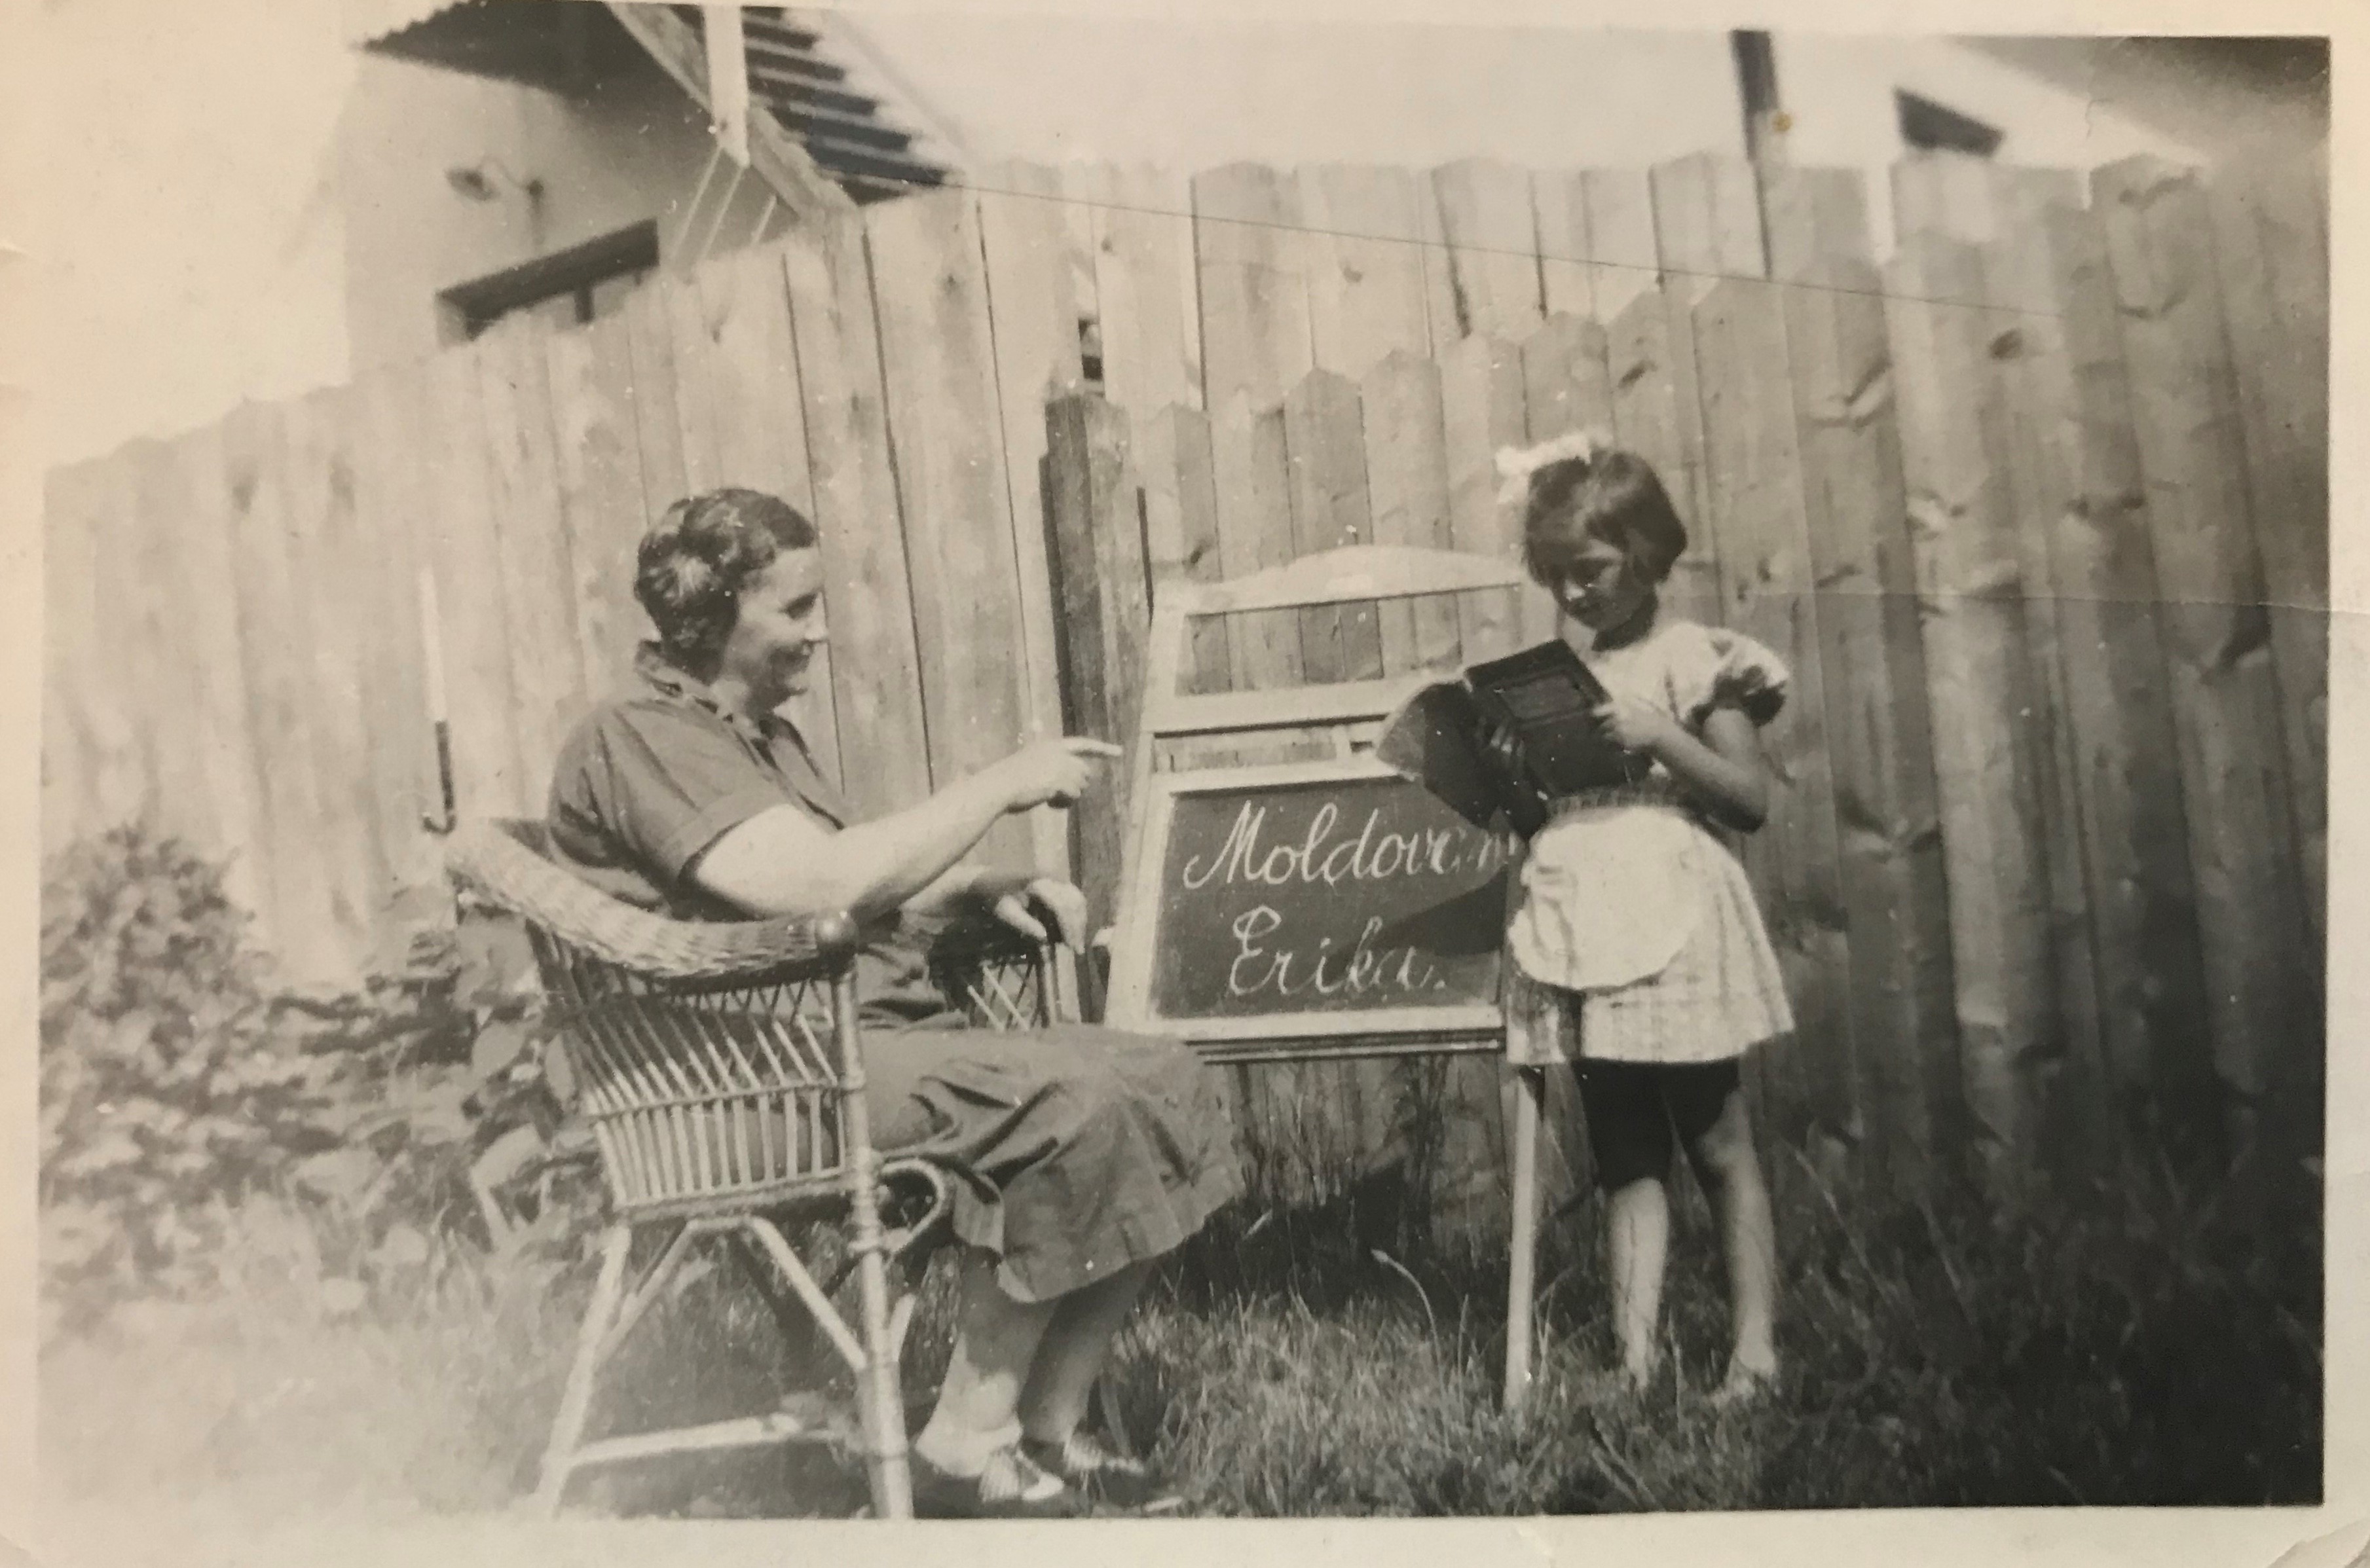 Rosa Moldovan, my great grandmother, teaches my aunt, Erika Goldberger, at home on a chalk board. Jewish students were barred from school during the Nazi regime.